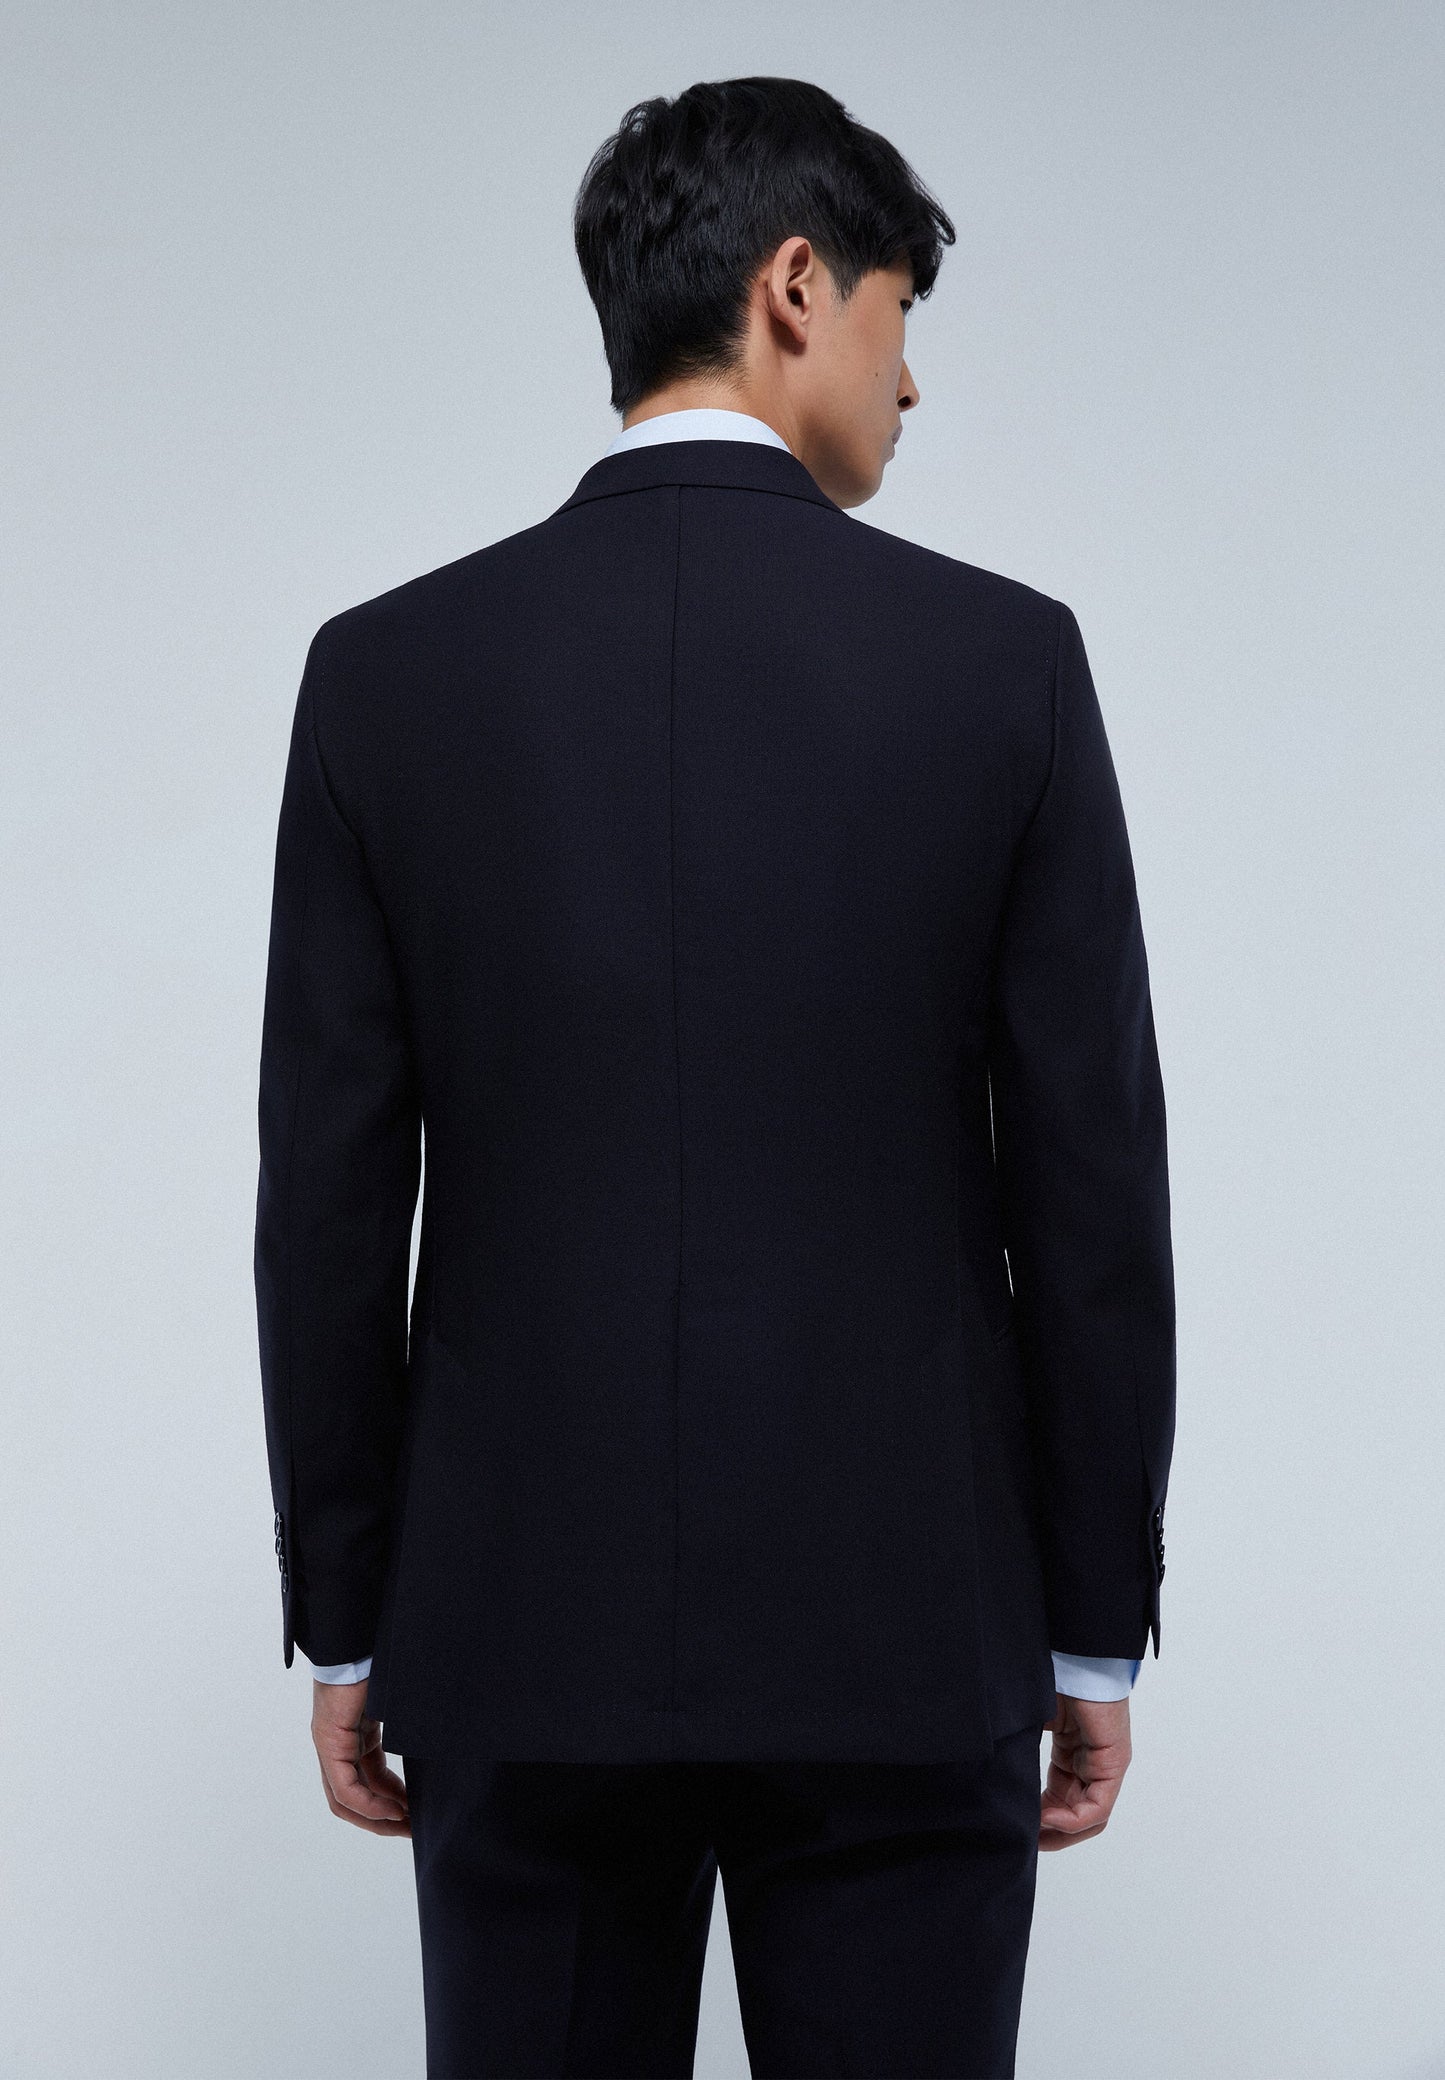 NAVY BLUE WOOL STRUCTURED SUIT